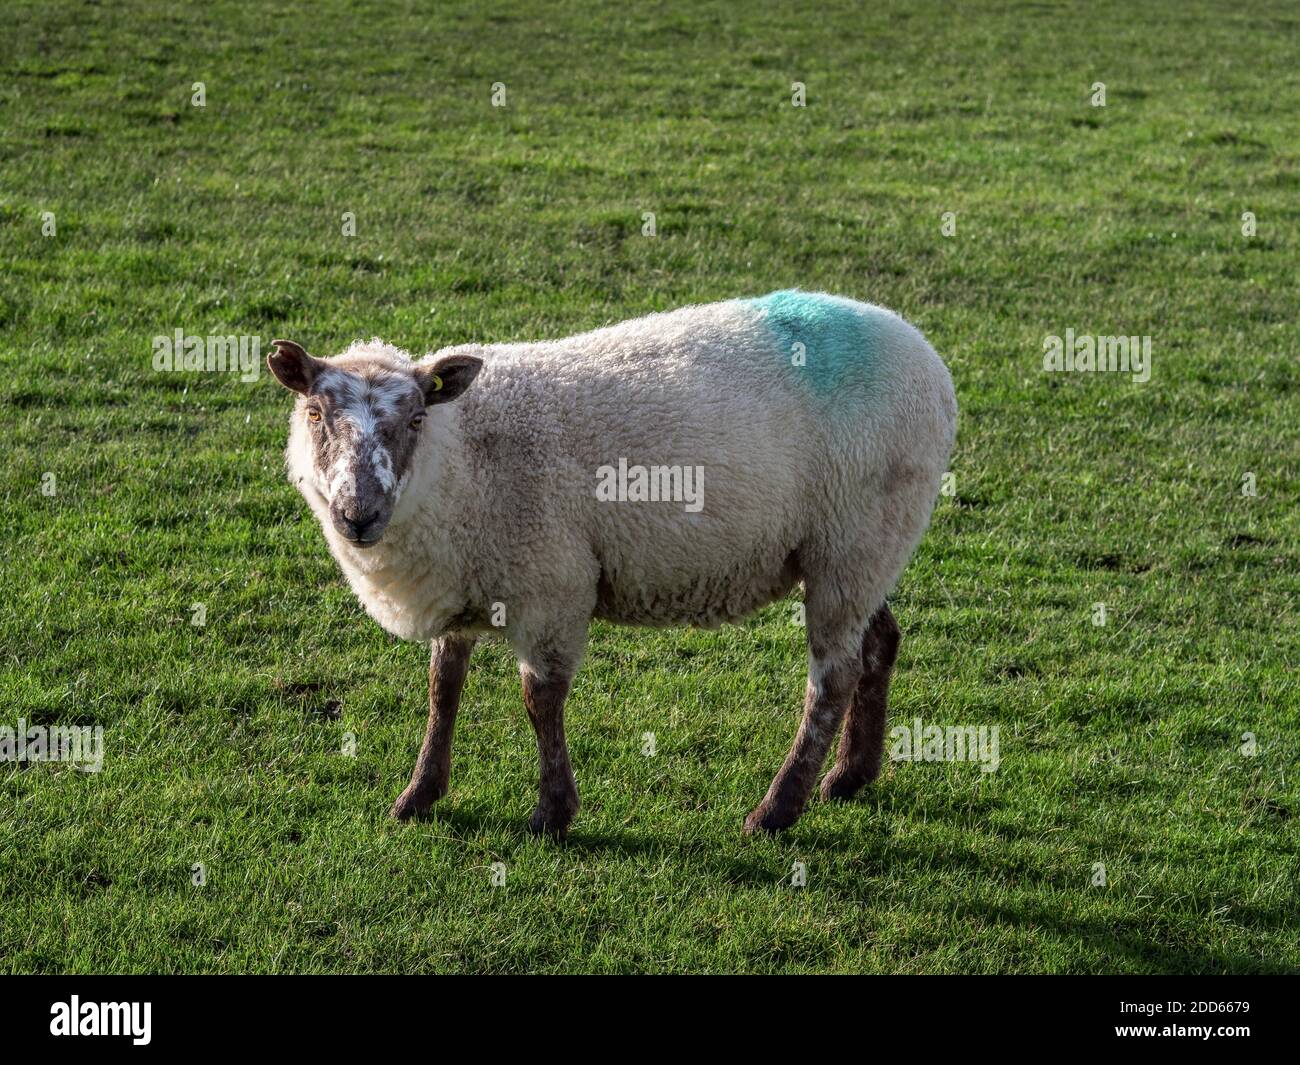 Mated ewe as shown by colour stain on her back. UK. Stock Photo